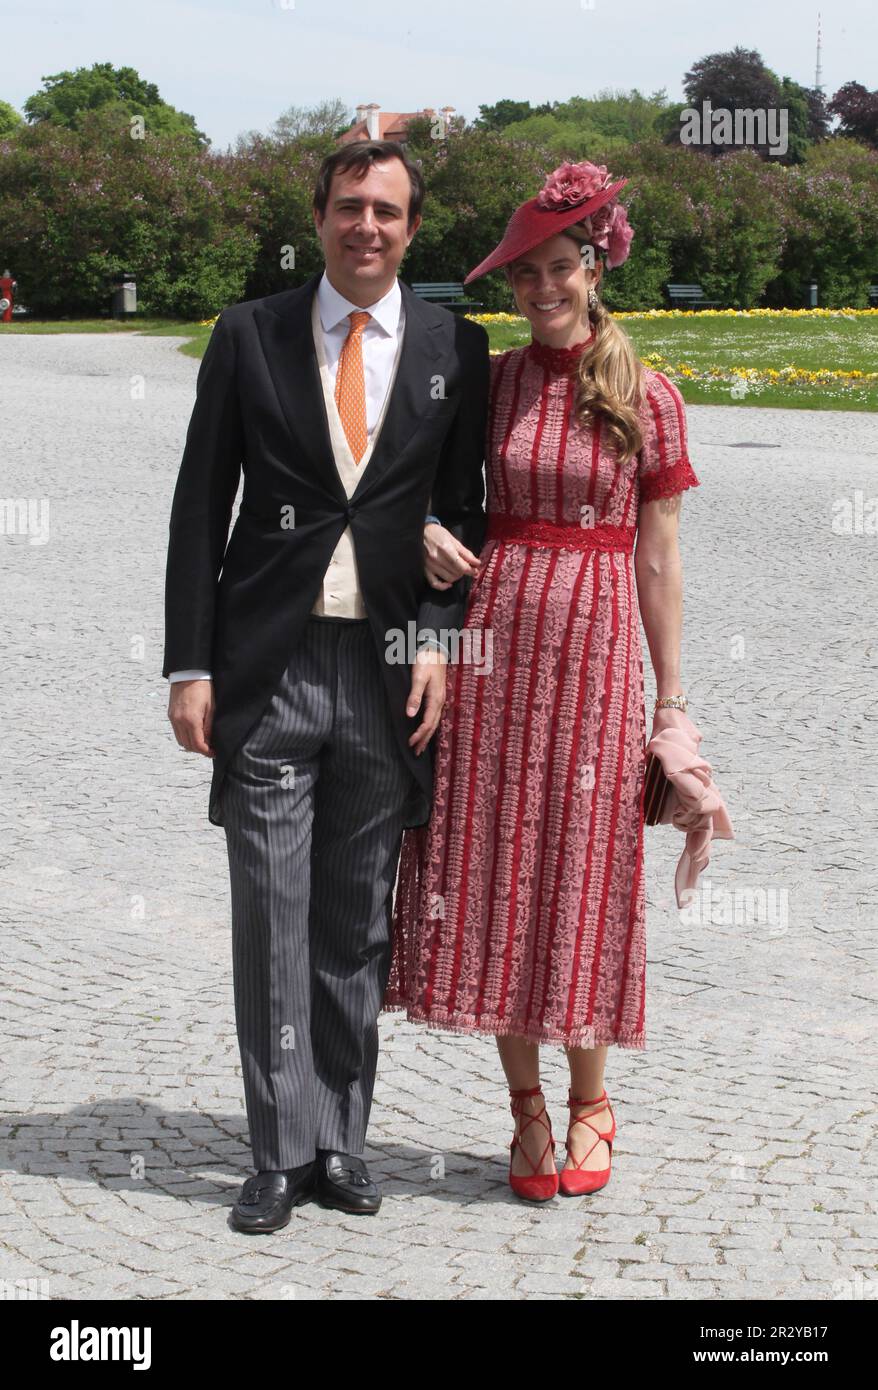 MUNICH, Germany - 20. MAY 2023: Princess Annunciata von und zu Liechtenstein and husband Emanuele MUSINI arrive at the Nymphenburg Palace for the wedding lunch, Die Prinzessin Annunciata von und zu Liechtenstein and husband (Ehemann) Emanuele MUSINI, Prince Ludwig von Bayern and his wife Sophie-Alexandra Princess of Bavaria got Married in the Theatiner Church, Prinz Ludwig is part of the Wittelsbacher dynasty . WITTELSBACHER HOCHZEIT, Royal Wedding in Munich on 20. May 2023, in Germany. Ludwig Prinz von Bayern und seine Frau Sophie-Alexandra Prinzessin von Bayern, born Sophie-Alexandra Eveki Stock Photo